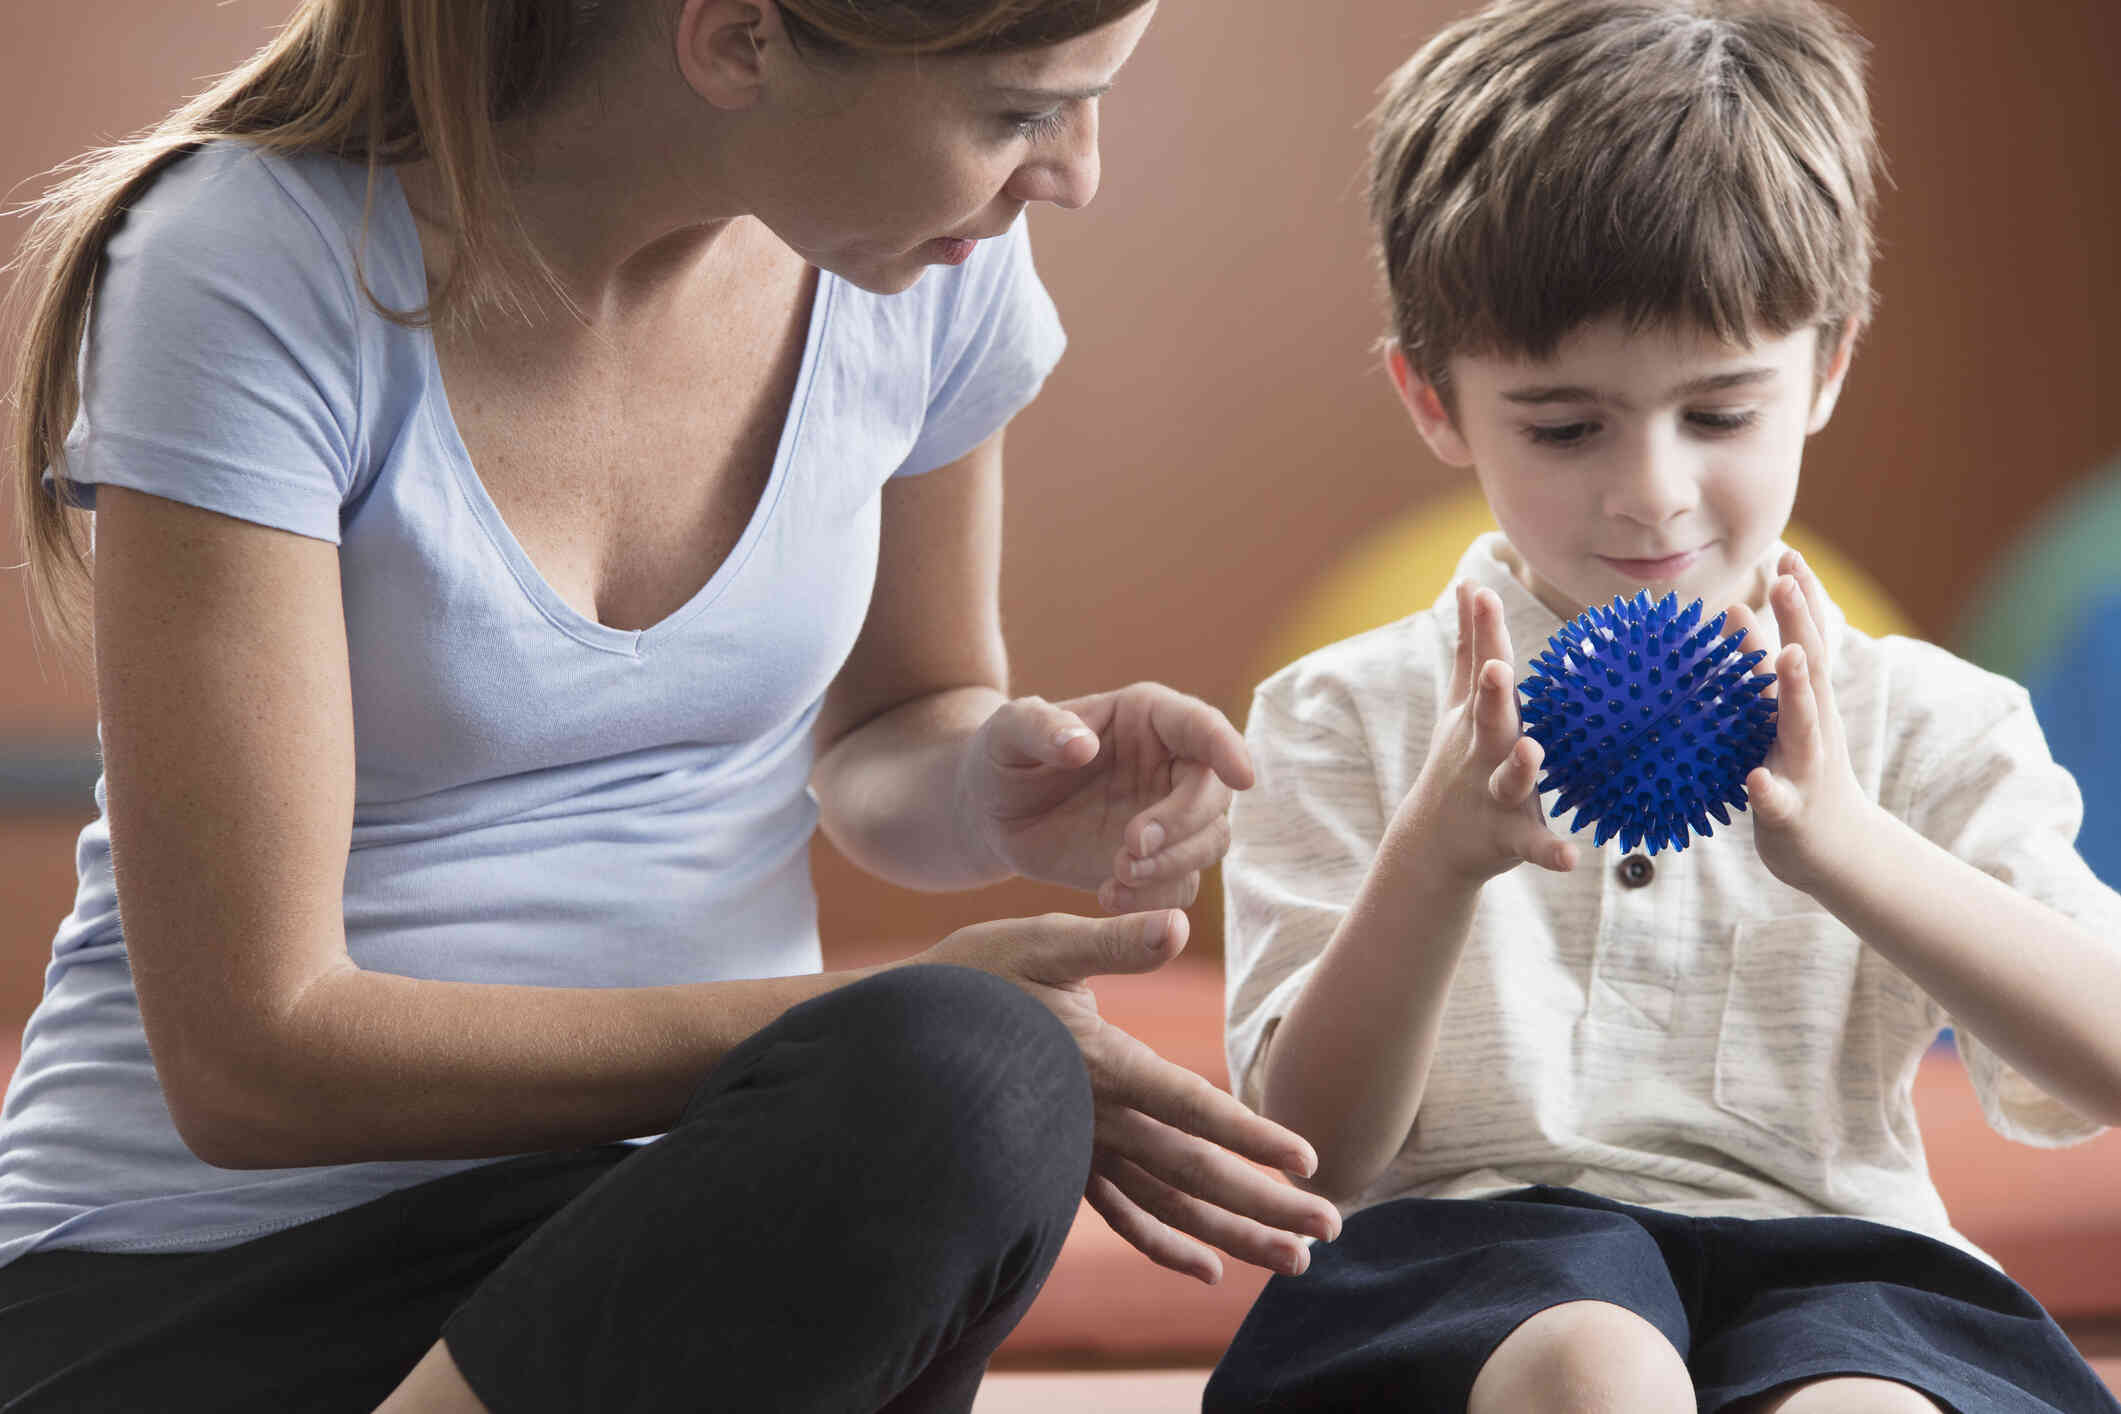 A young boy holds a blue ball in his hands with a smile as a woman sits next to him and smiles at him.